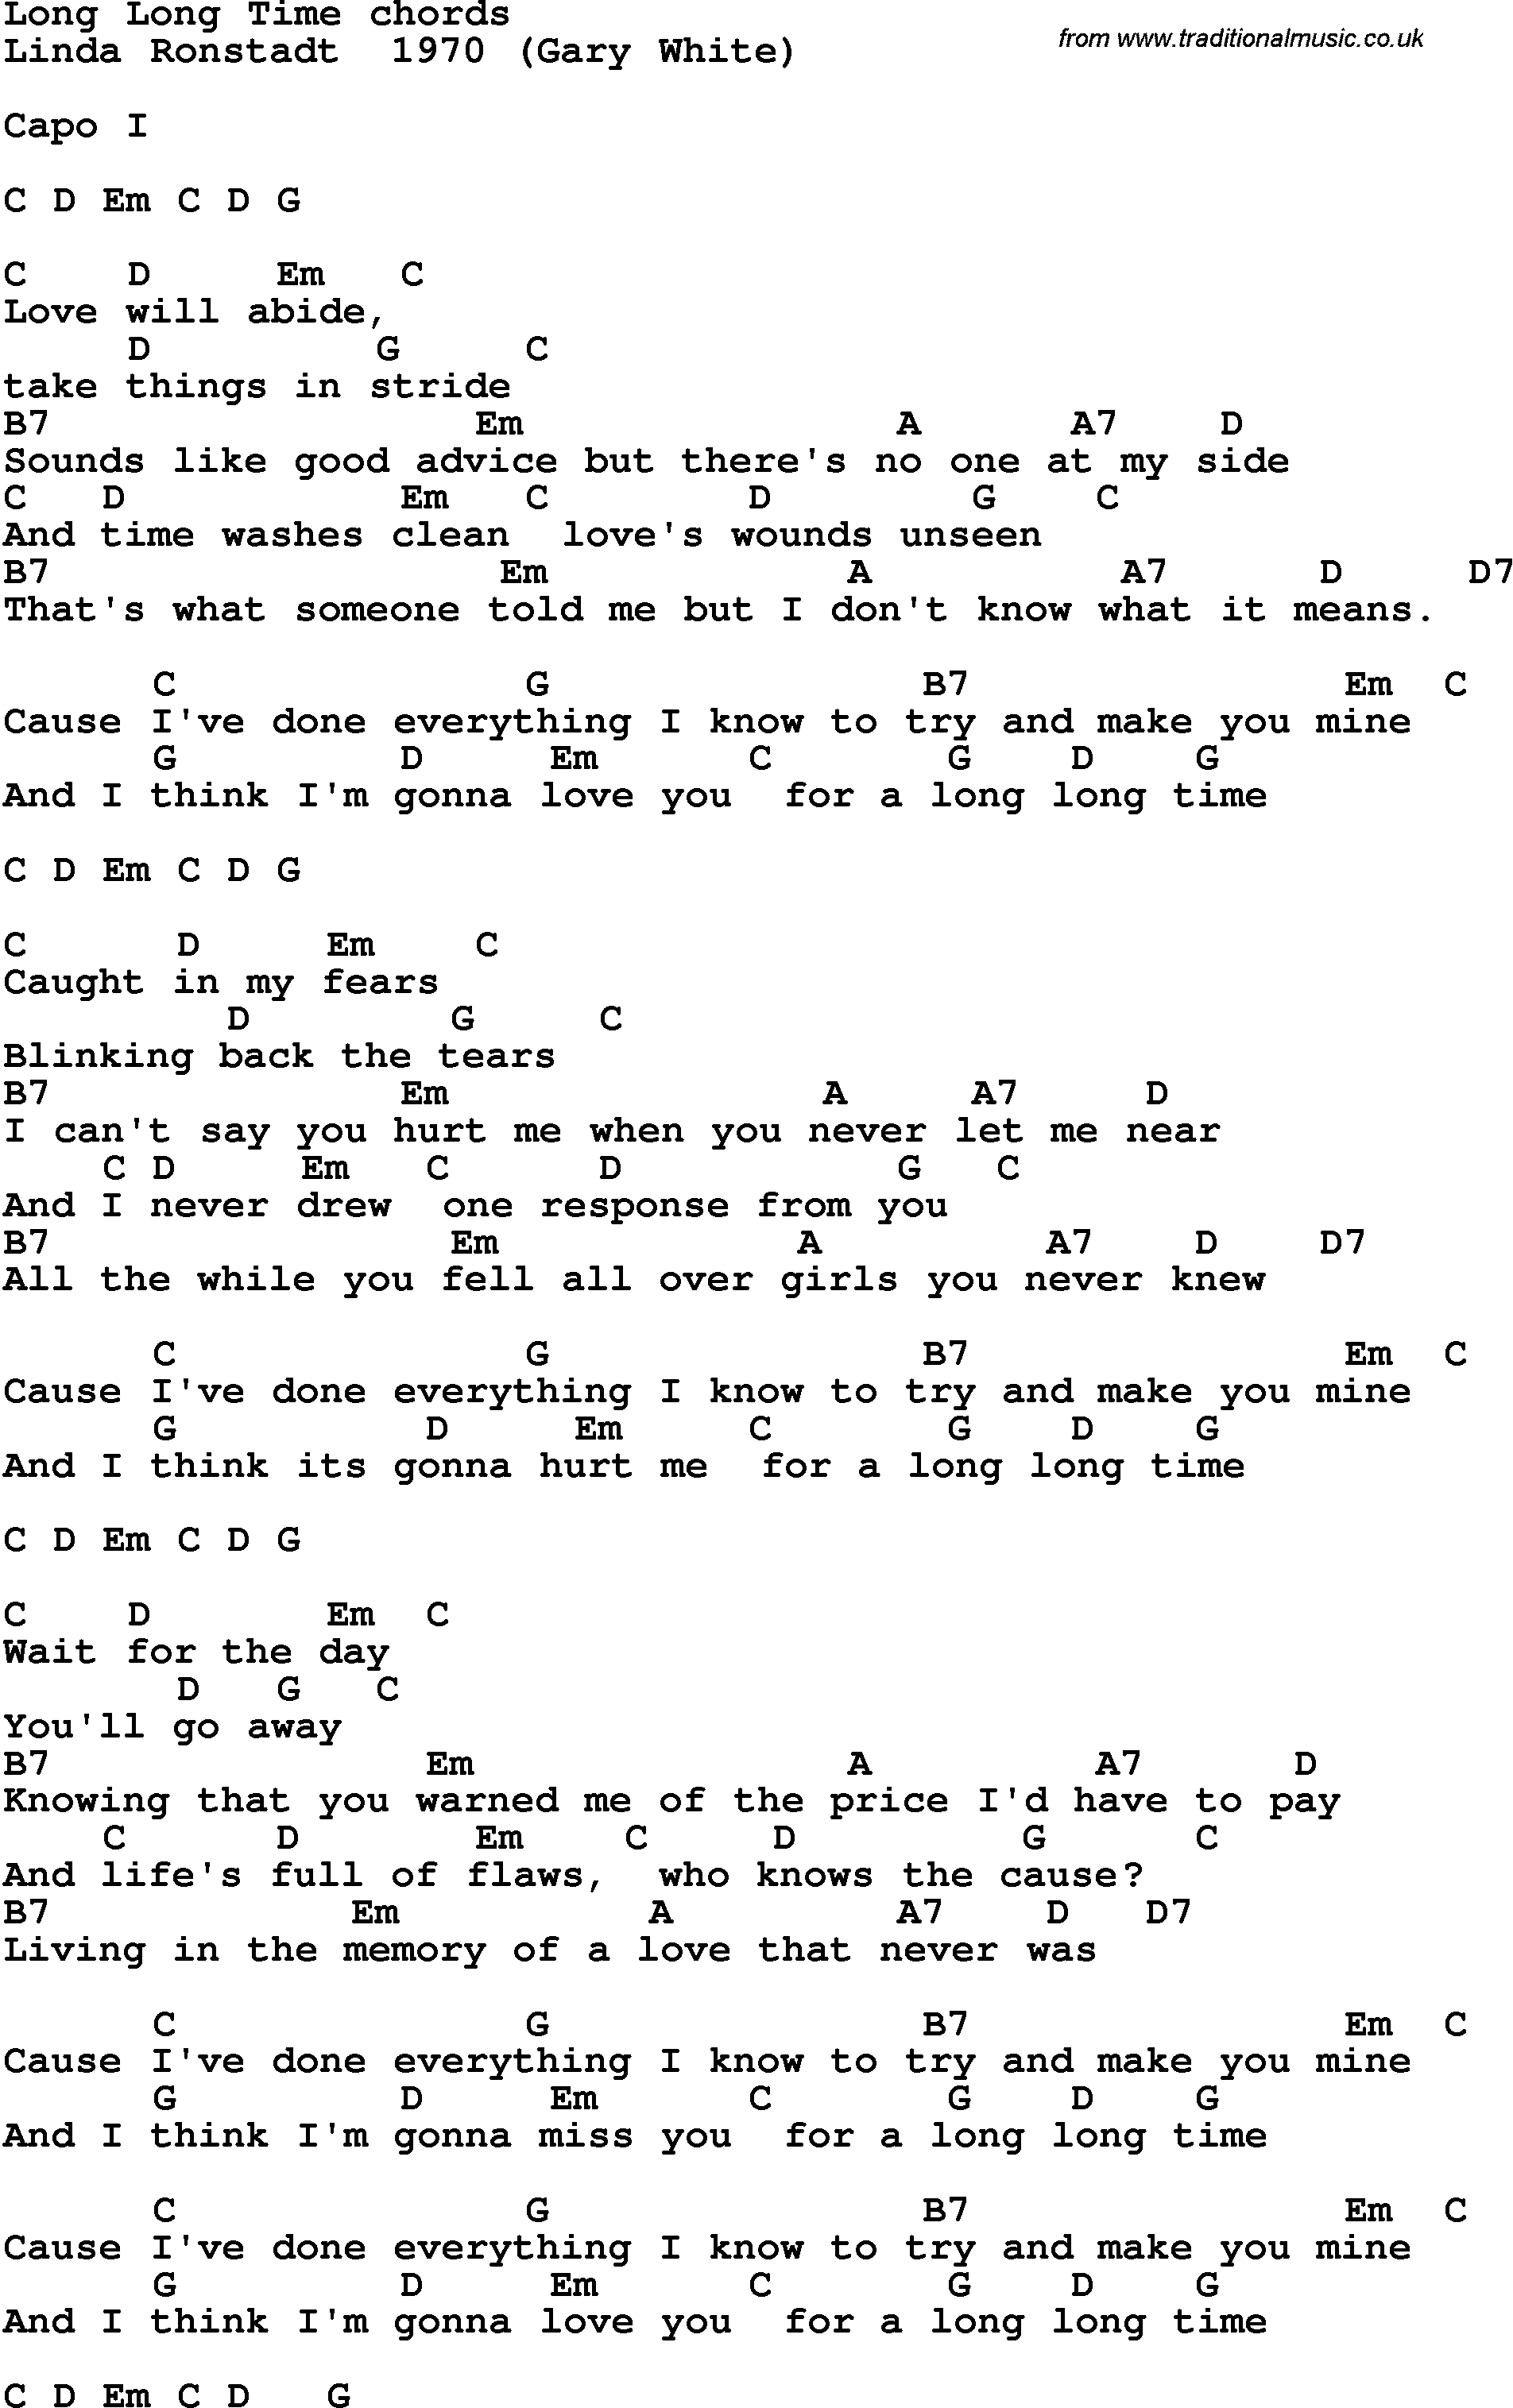 Song Lyrics with guitar chords for Long Long Time